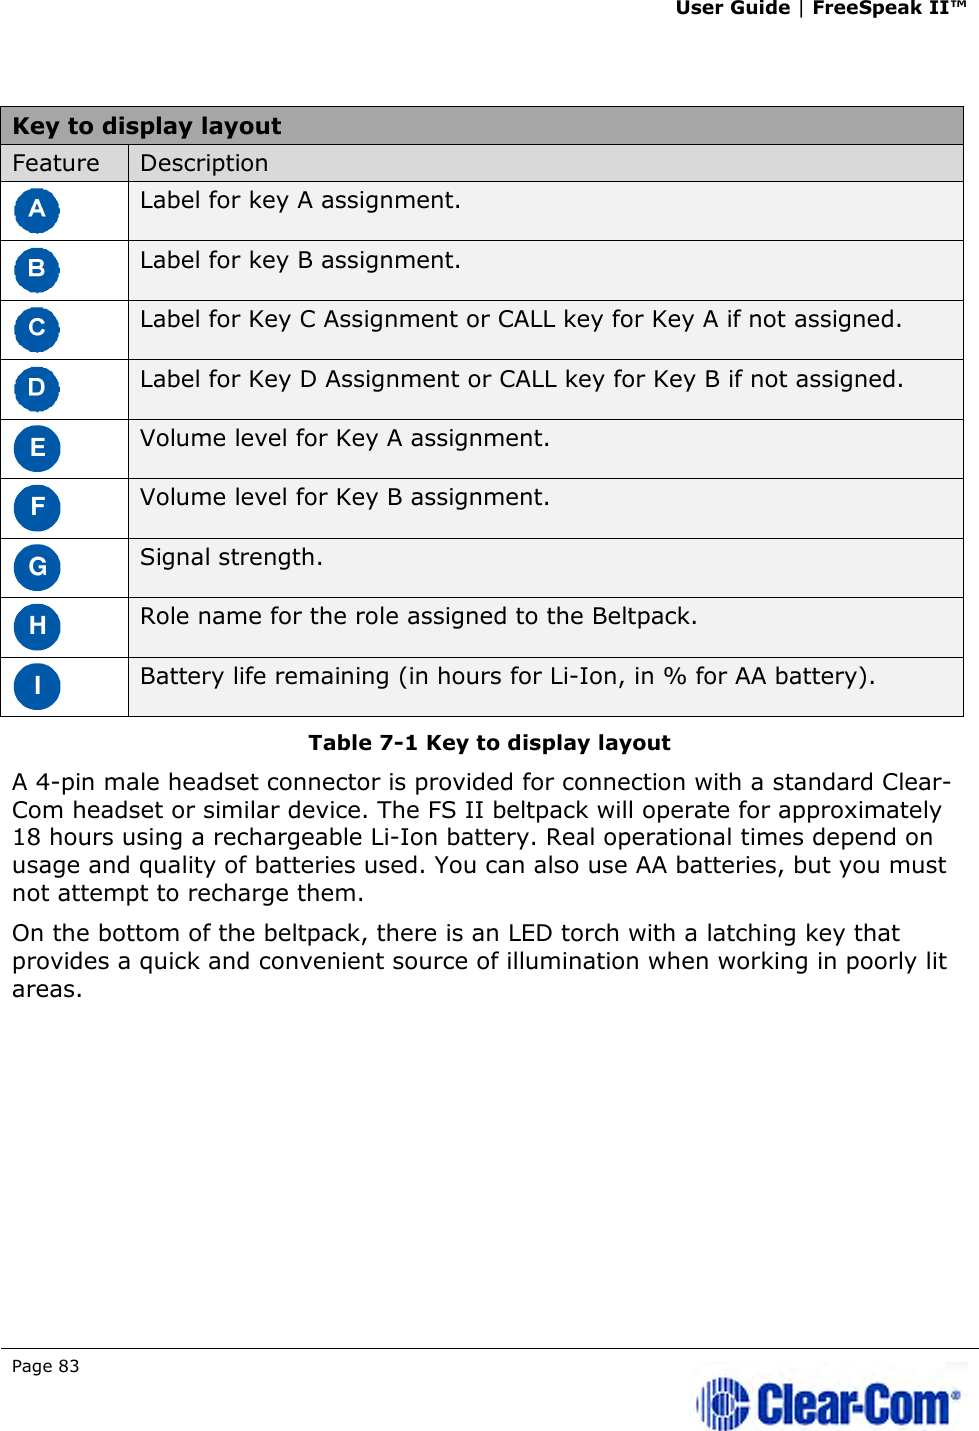 User Guide | FreeSpeak II™  Page 83    Key to display layout Feature  Description  Label for key A assignment.  Label for key B assignment.  Label for Key C Assignment or CALL key for Key A if not assigned.  Label for Key D Assignment or CALL key for Key B if not assigned. E Volume level for Key A assignment. F Volume level for Key B assignment. G Signal strength. H Role name for the role assigned to the Beltpack. I Battery life remaining (in hours for Li-Ion, in % for AA battery). Table 7-1 Key to display layout A 4-pin male headset connector is provided for connection with a standard Clear-Com headset or similar device. The FS II beltpack will operate for approximately 18 hours using a rechargeable Li-Ion battery. Real operational times depend on usage and quality of batteries used. You can also use AA batteries, but you must not attempt to recharge them. On the bottom of the beltpack, there is an LED torch with a latching key that provides a quick and convenient source of illumination when working in poorly lit areas.  